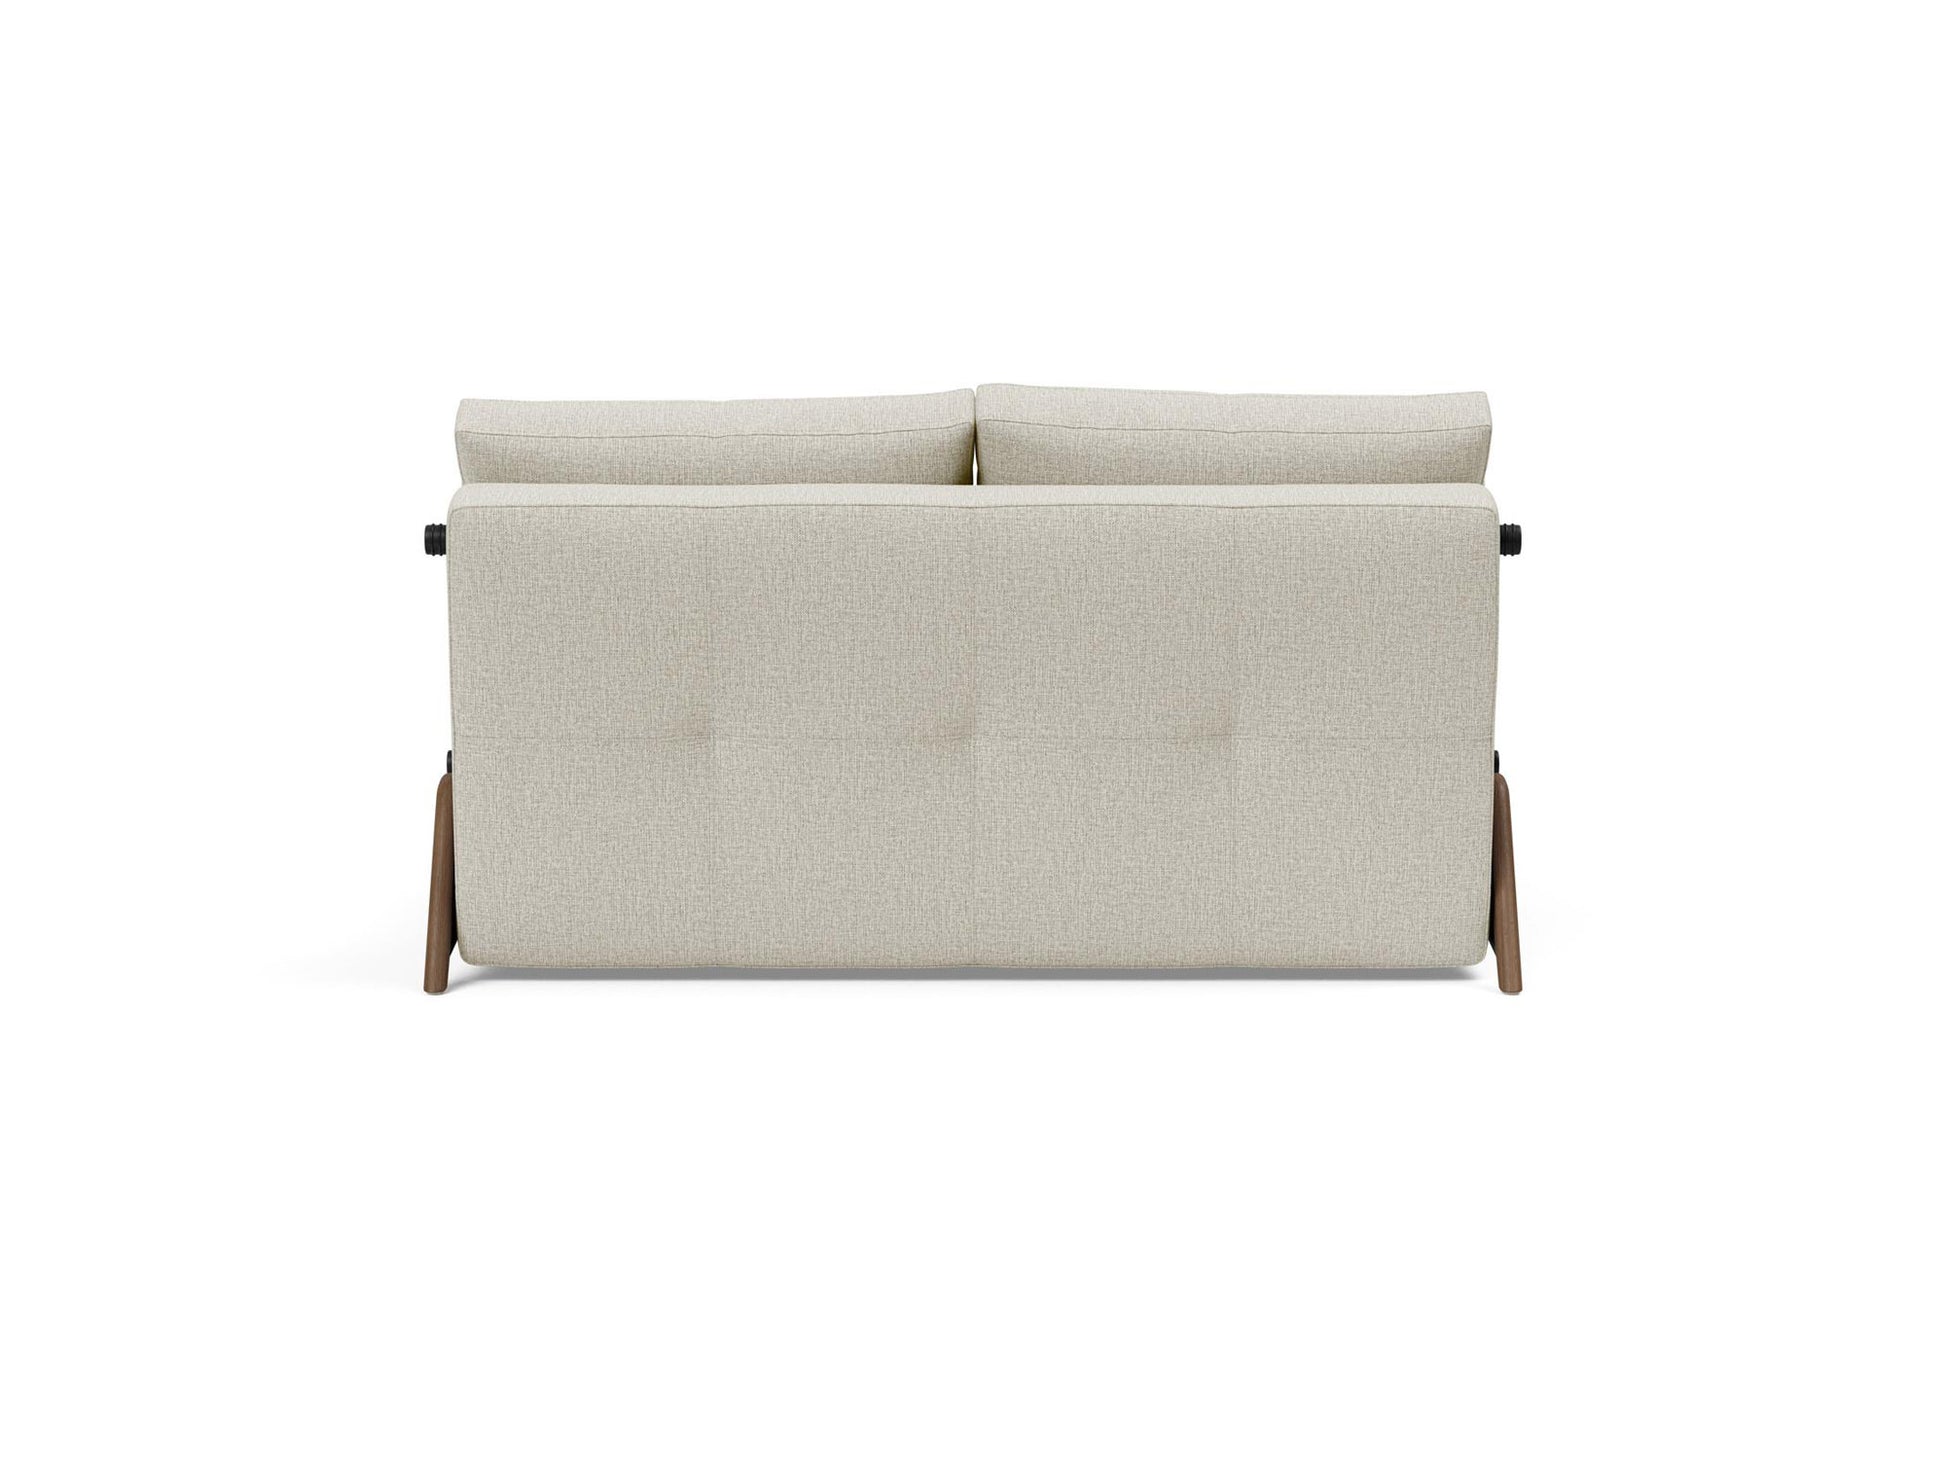 Innovation Living Cubed Full Sofa Bed With Dark Wood Legs